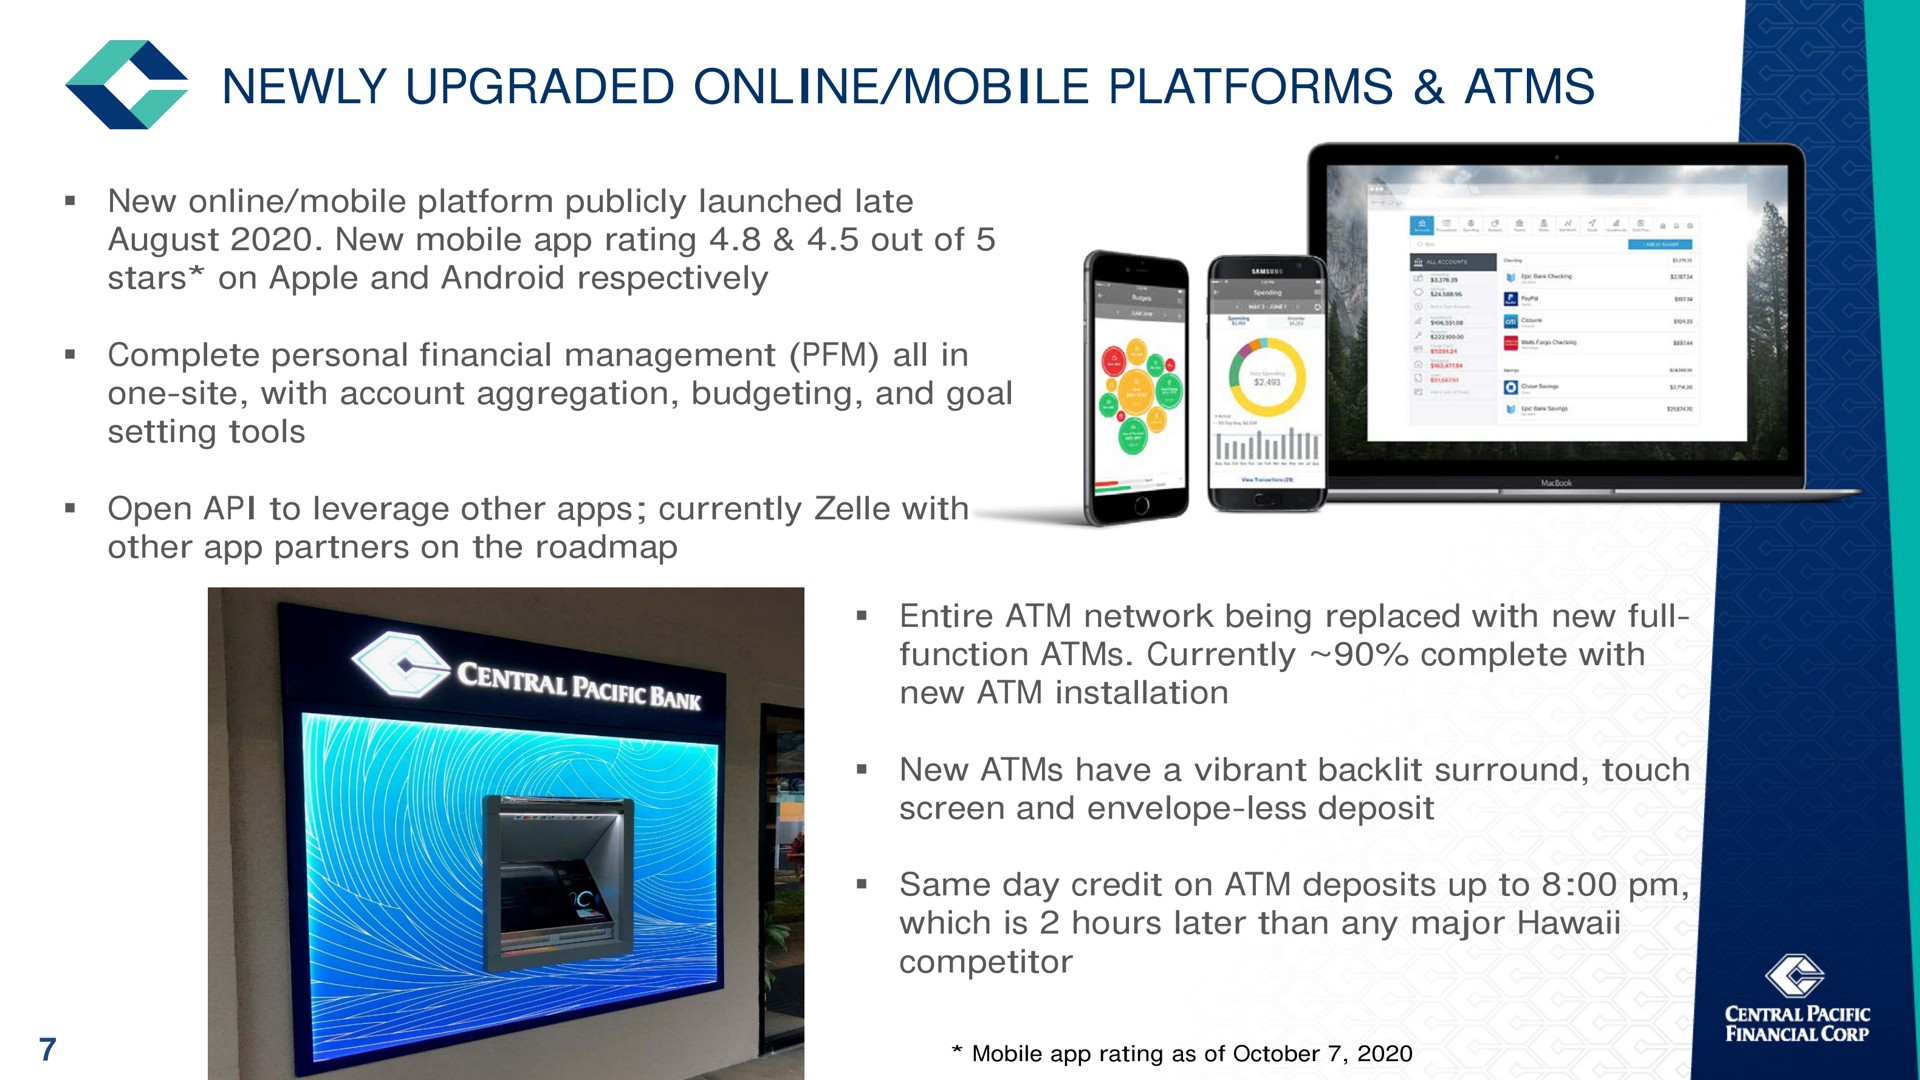 newly upgraded mobile platforms | Central Pacific Financial